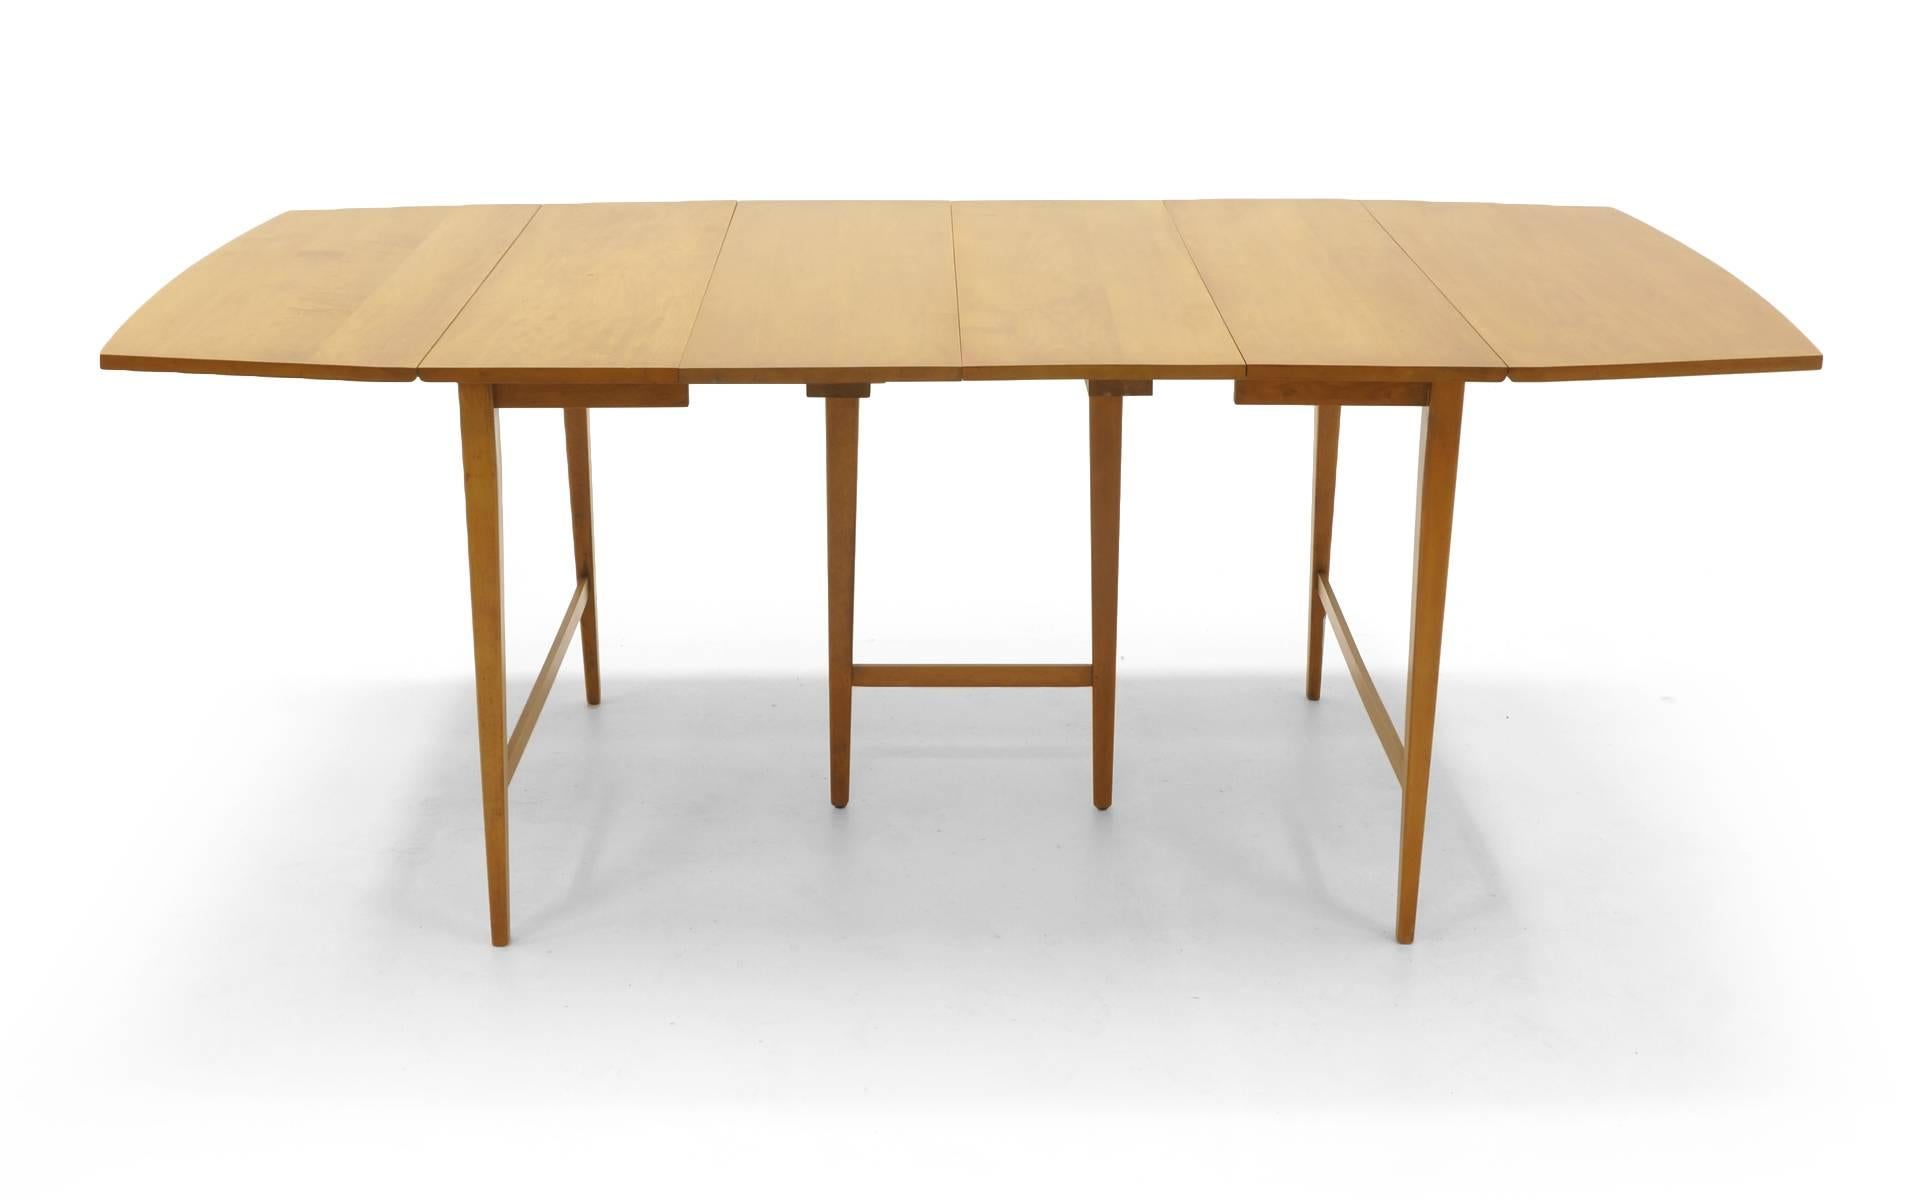 Paul McCobb drop-leaf dining table with center legs for Winchendon Modern with three additional leaves. At its smallest, the table is 24 inch by 40 inch table for two. Each drop-leaf is 15 inches so it extends to 39 inches with one leaf up and 54